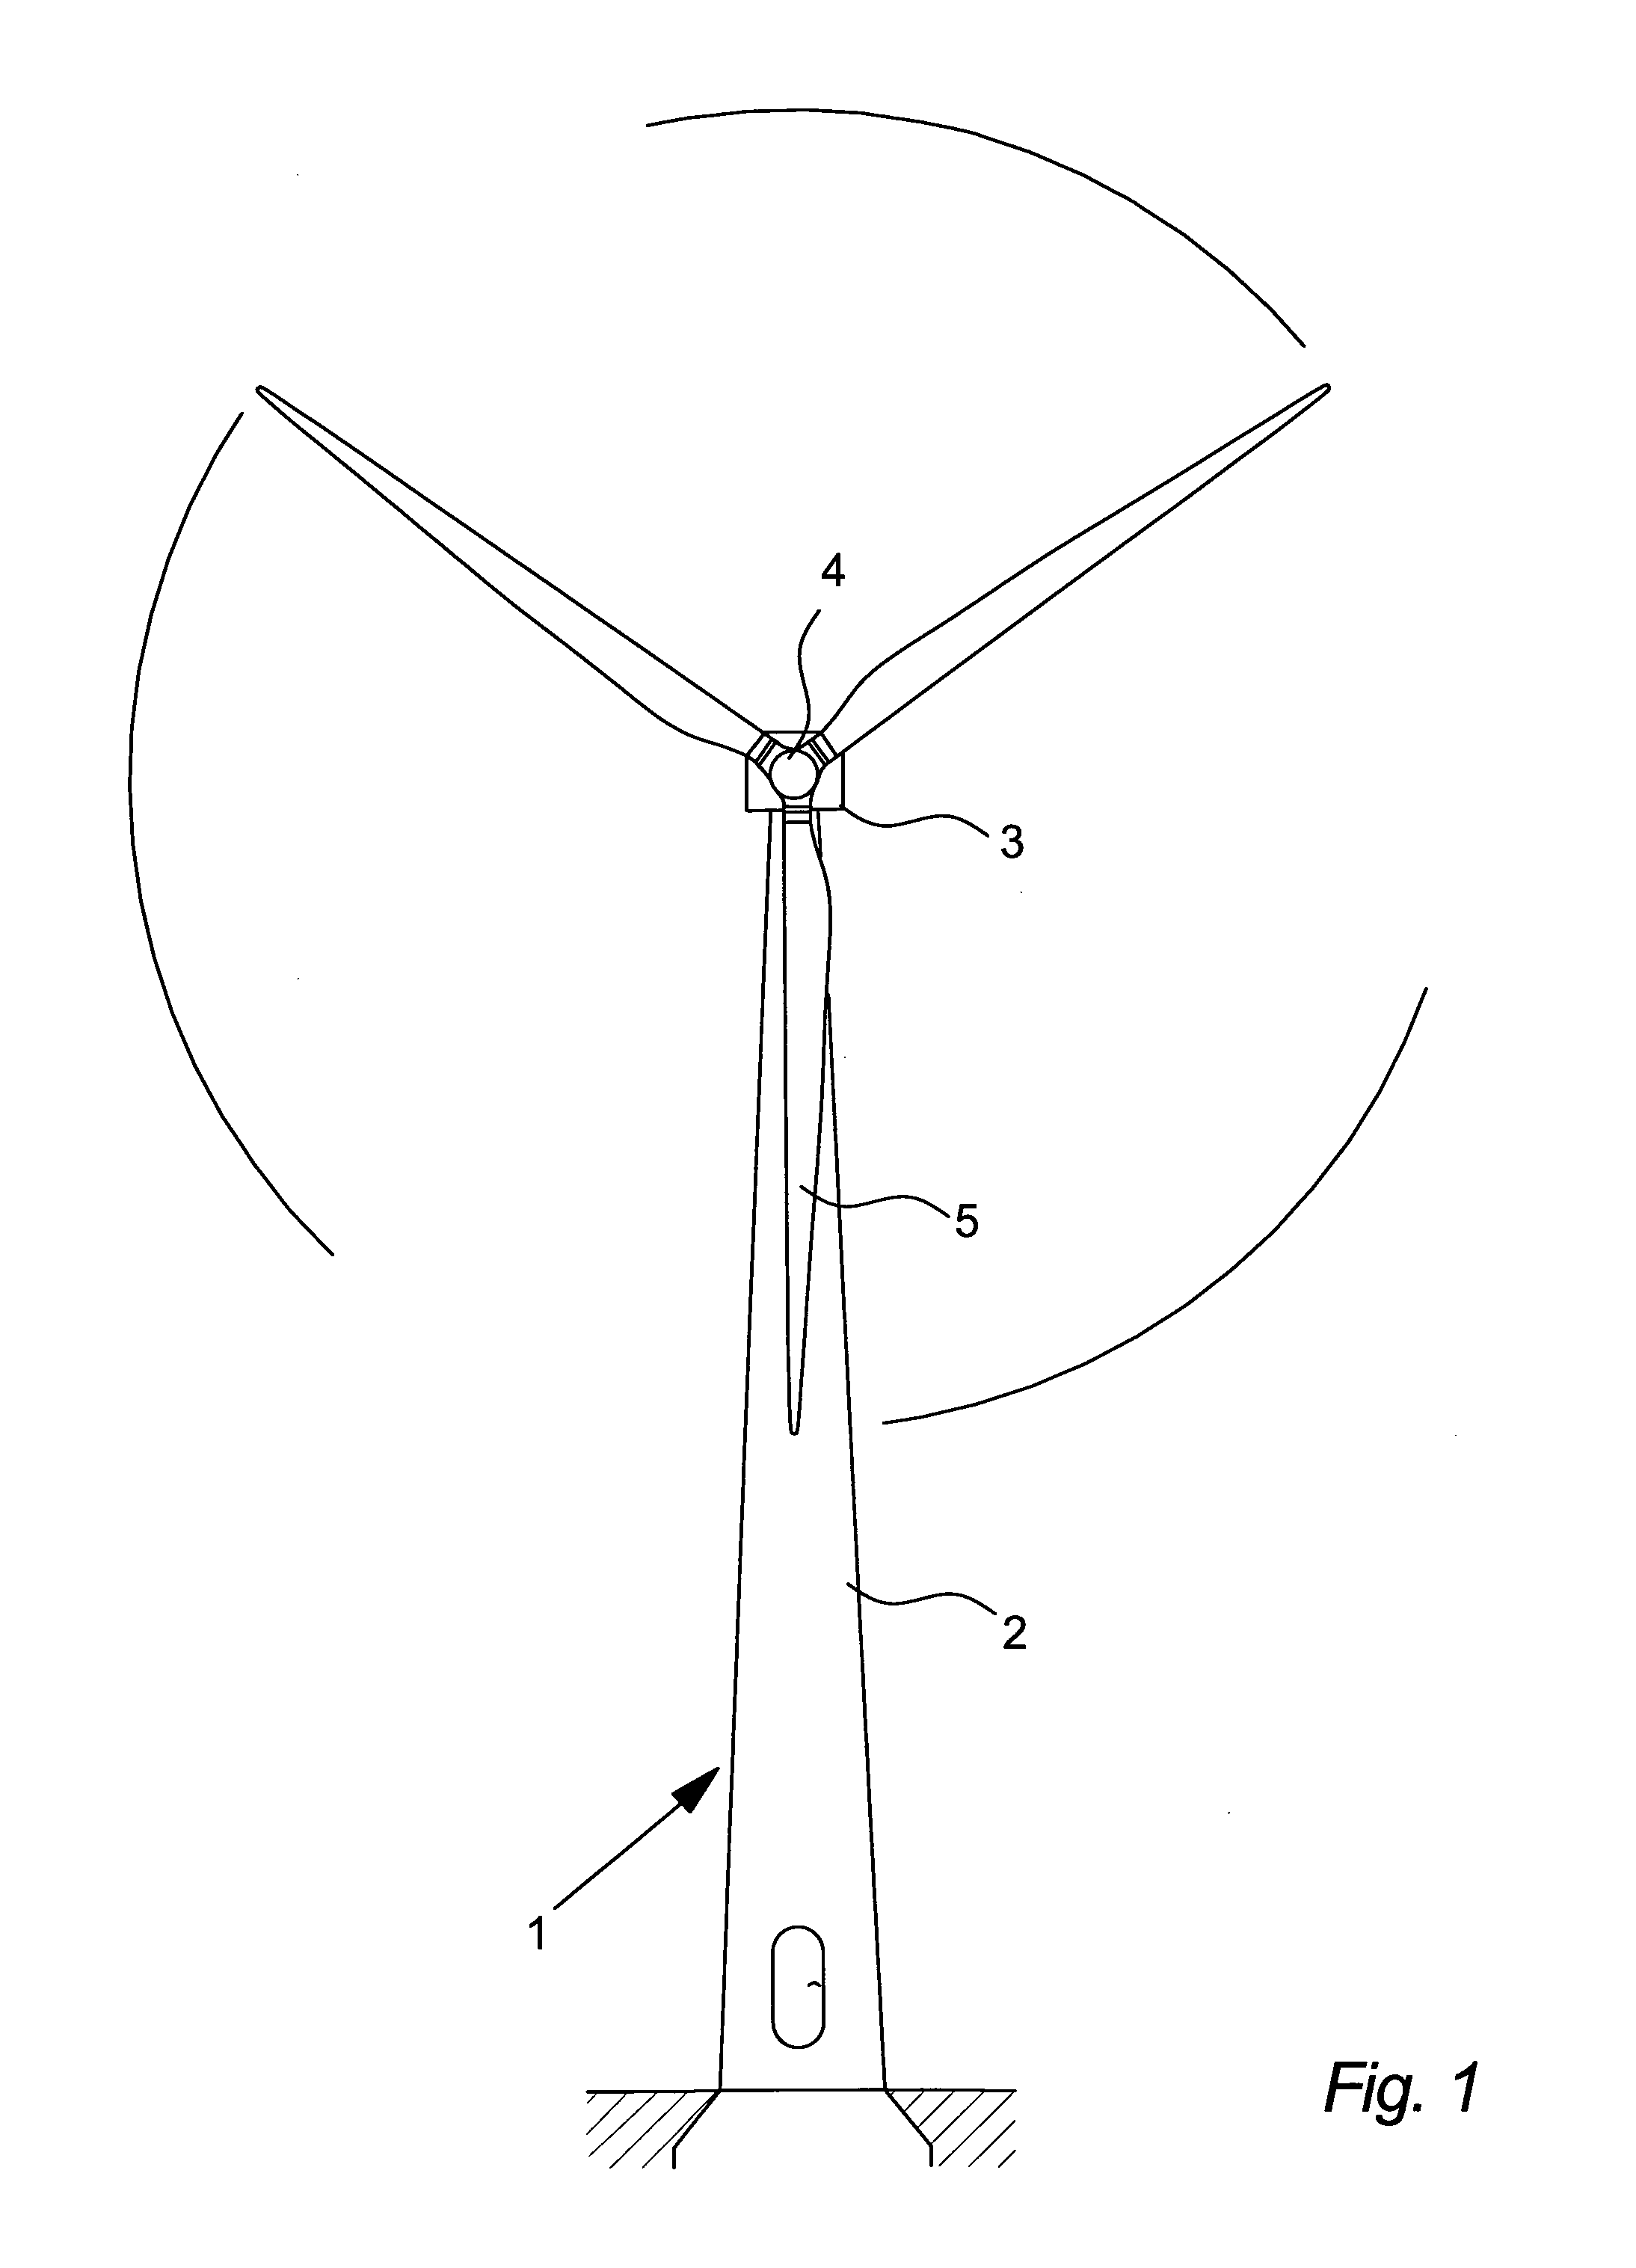 Method and system for registering events in wind turbines of a wind power system